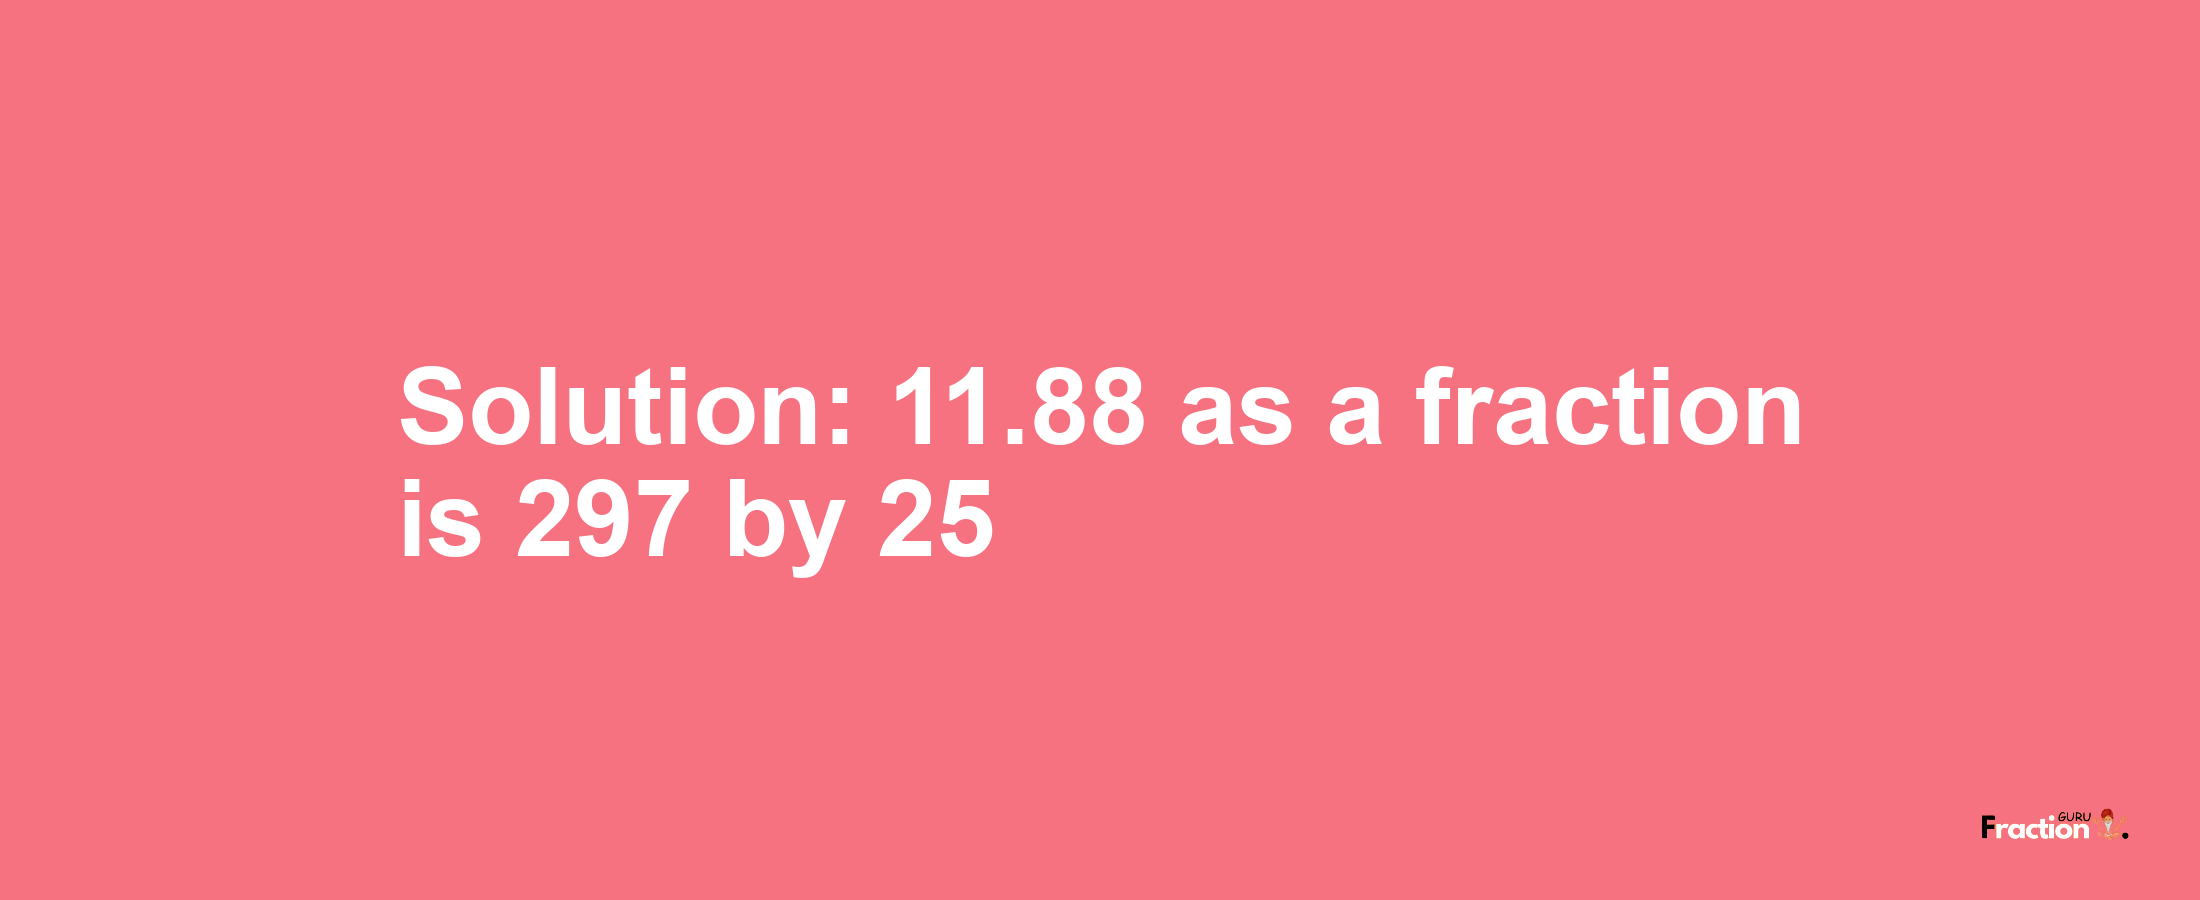 Solution:11.88 as a fraction is 297/25